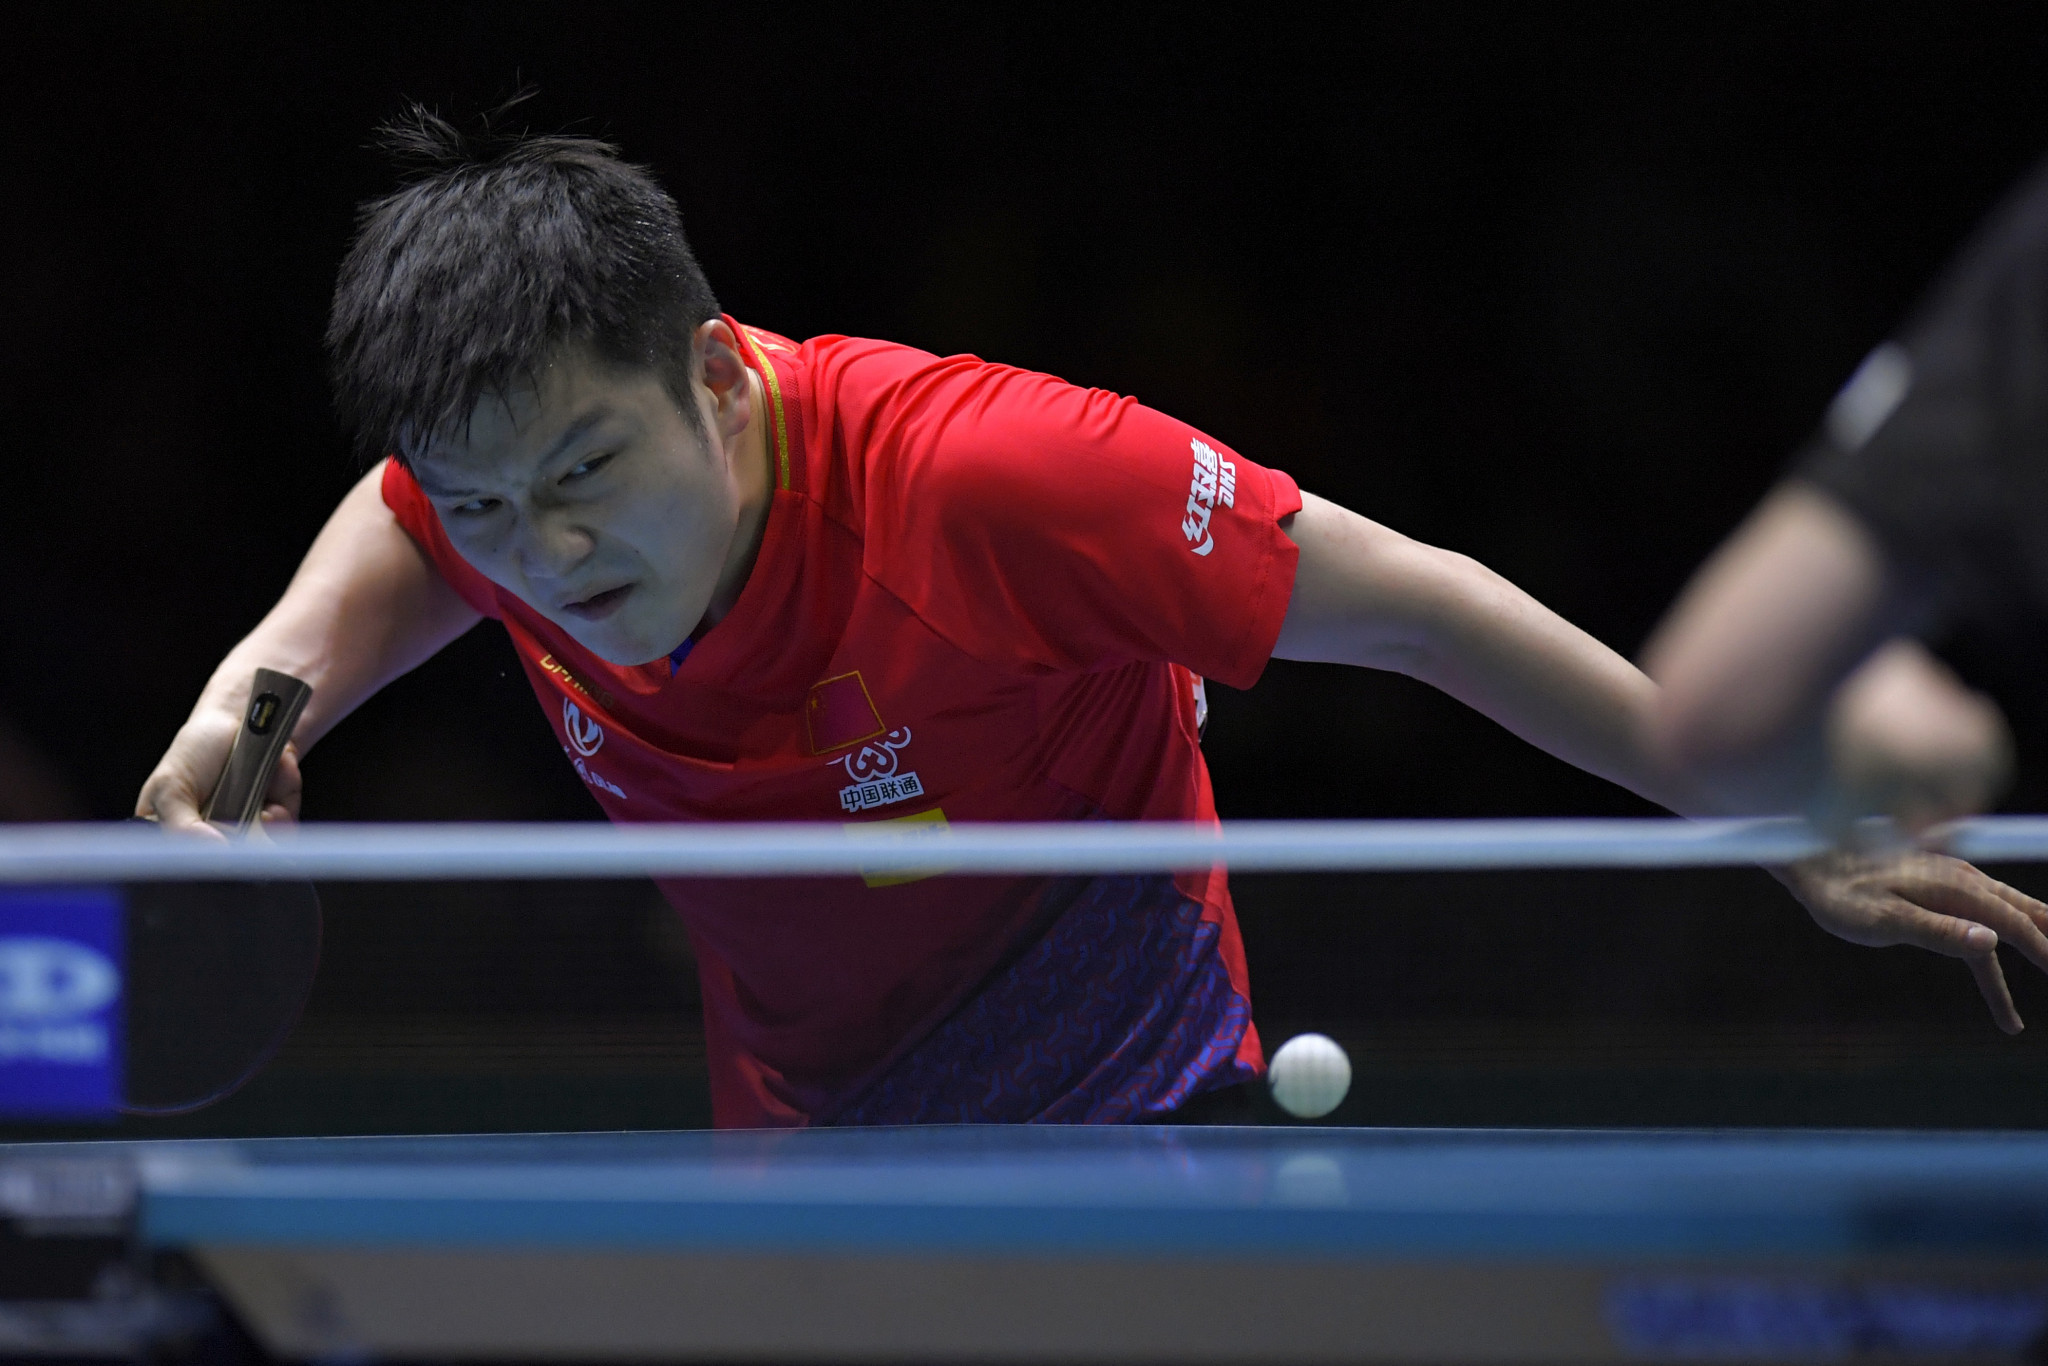 Fan chases second consecutive title at ITTF Austrian Open